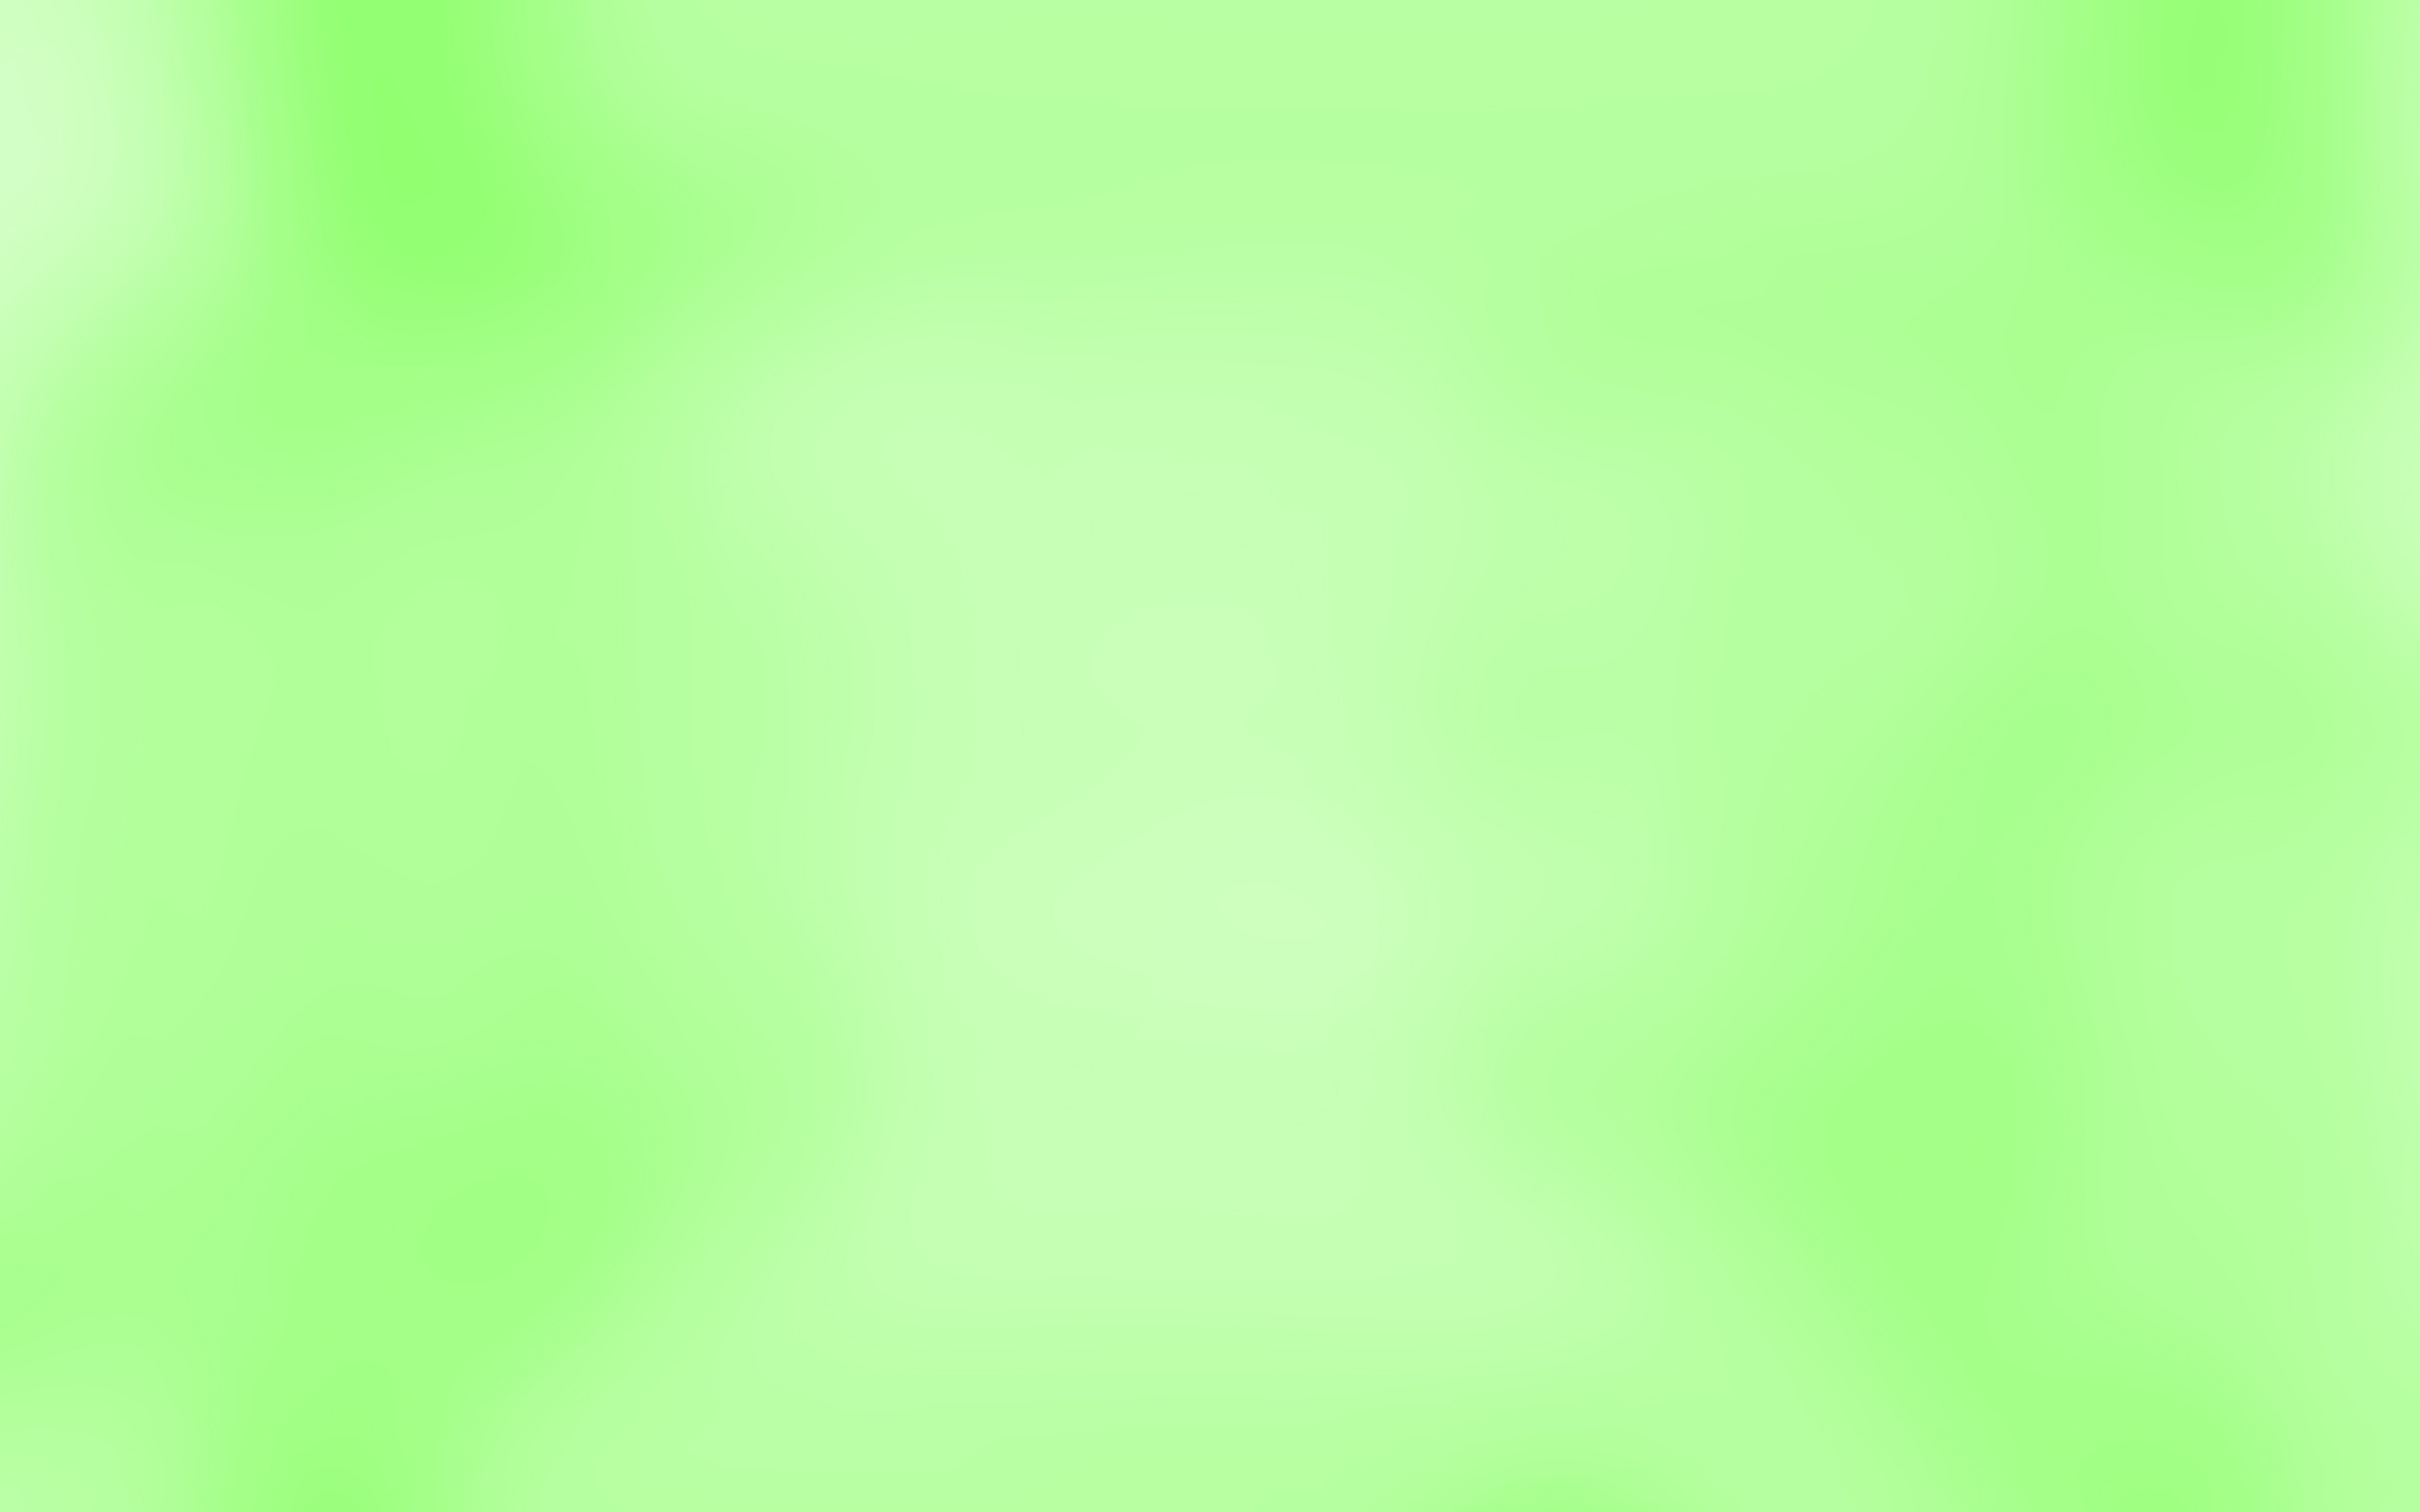 Green Simple Pastel Soft Color For Background Green Plain Color